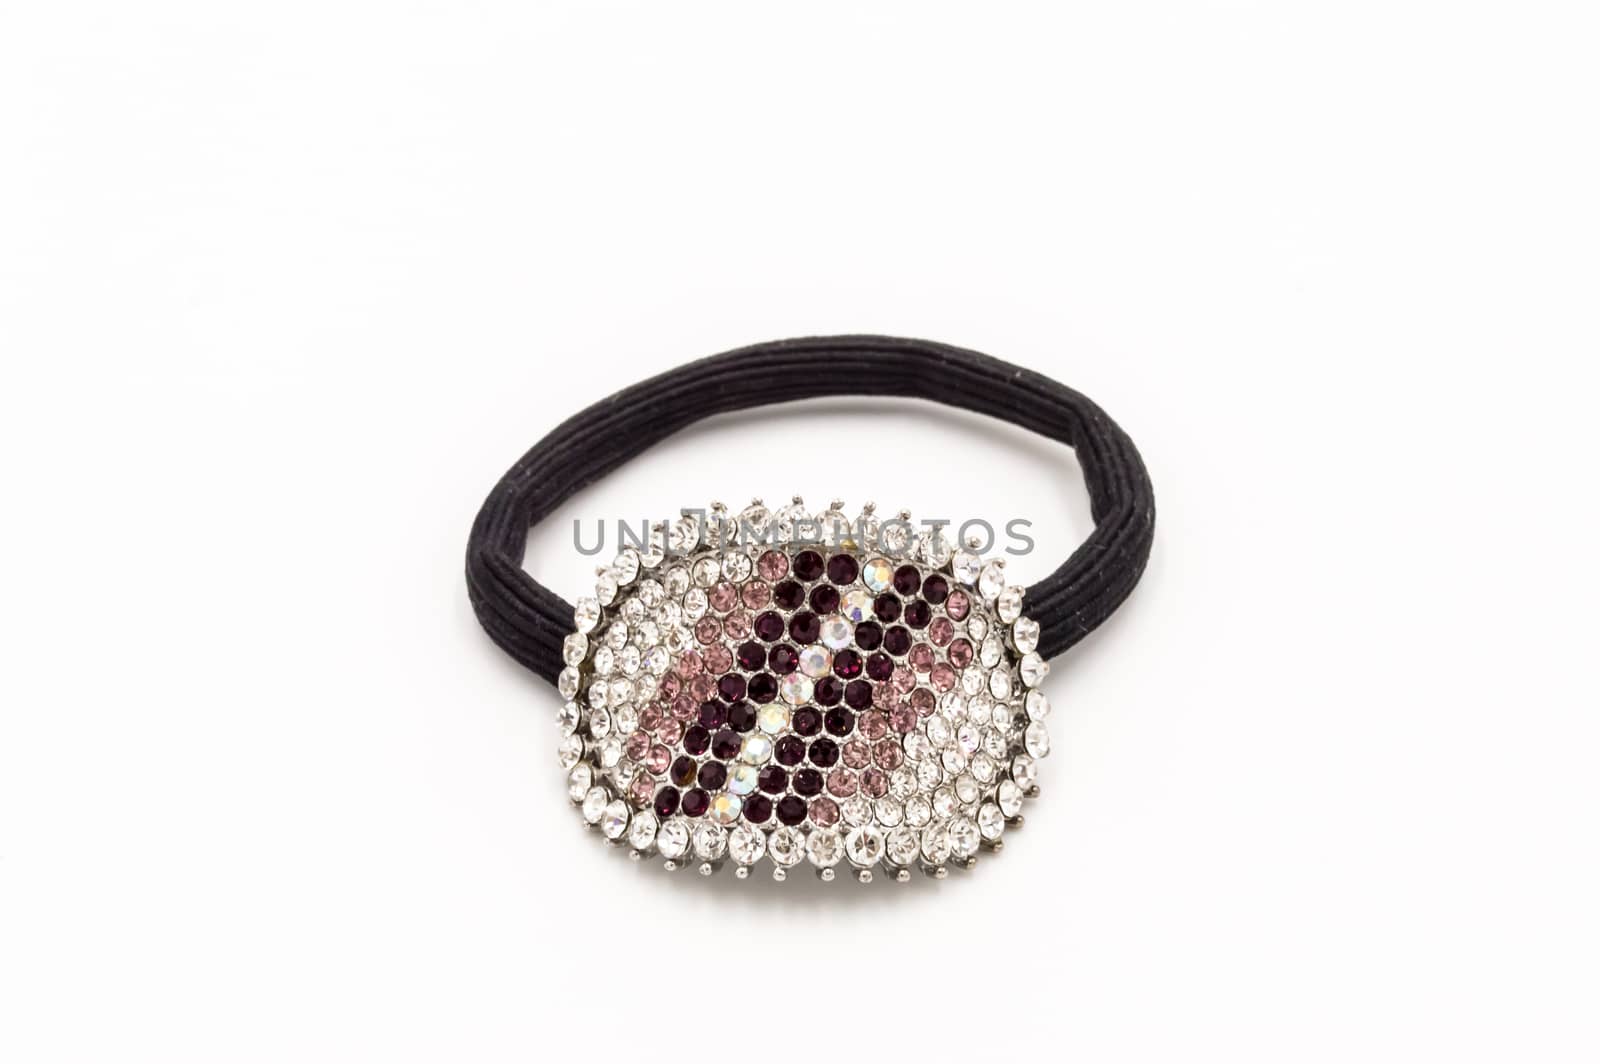 Hair elastic with a brooch set with stones on a white background